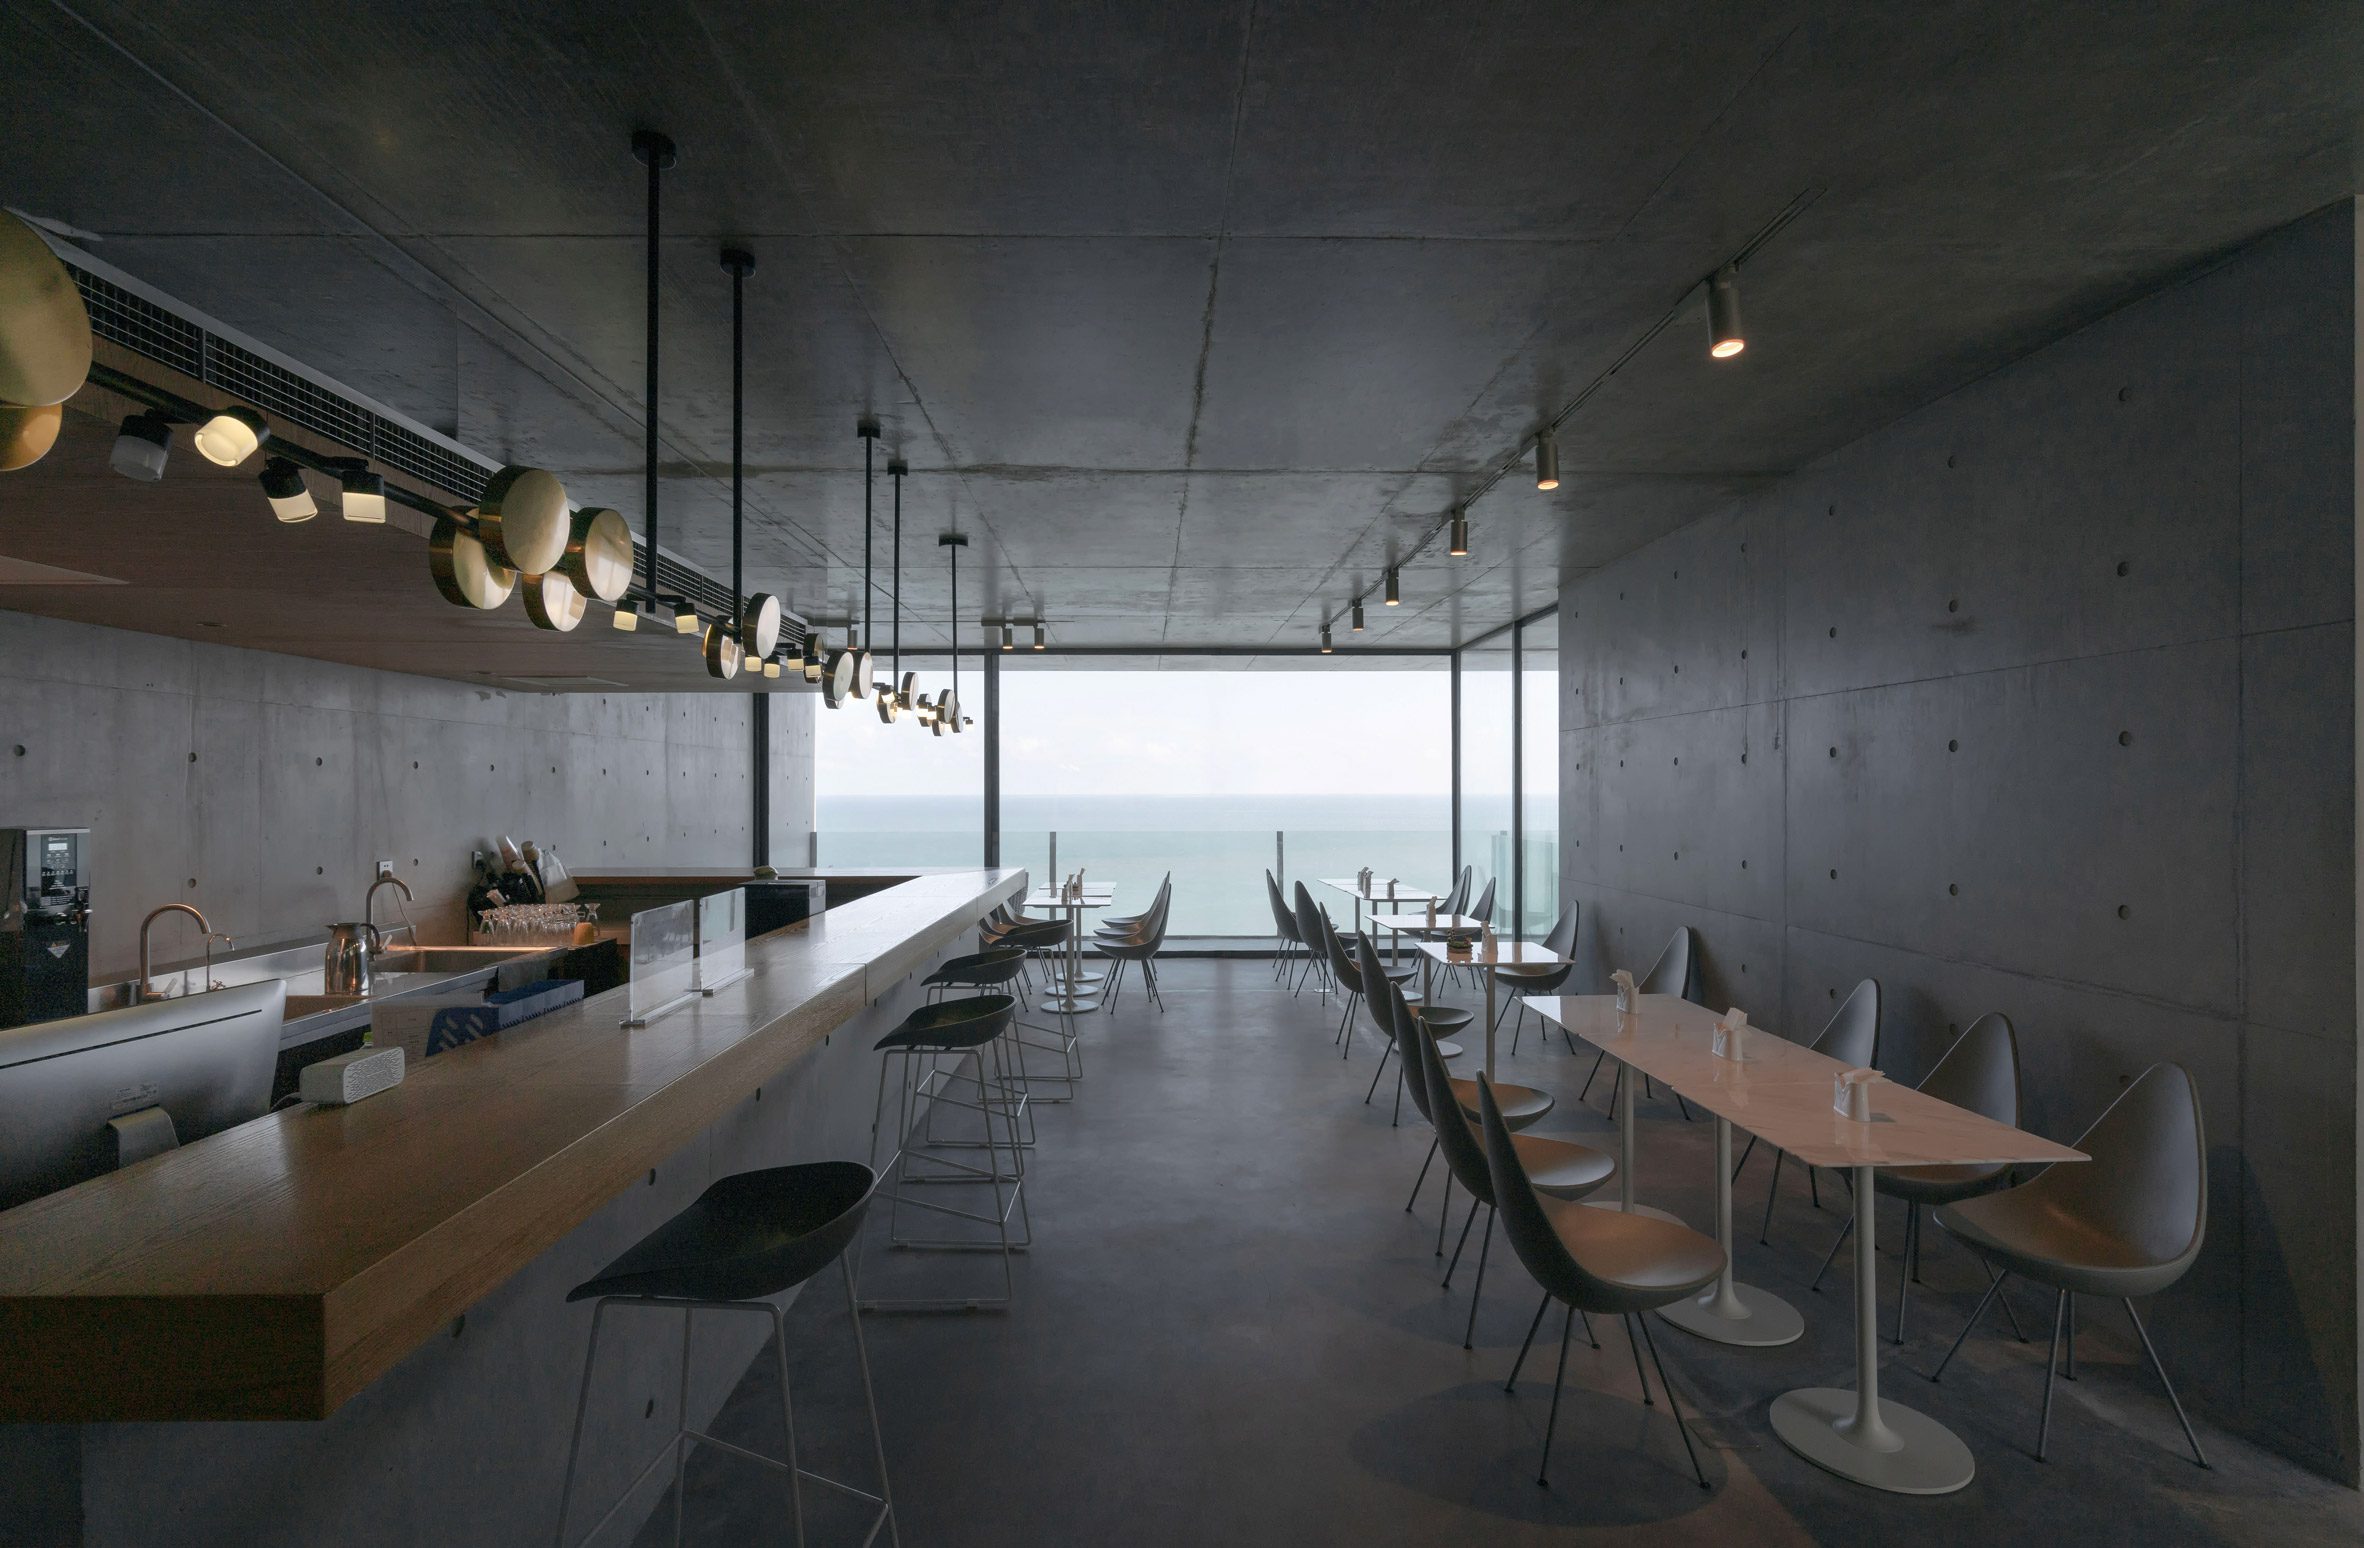 Interior of Cliff Cafe in China